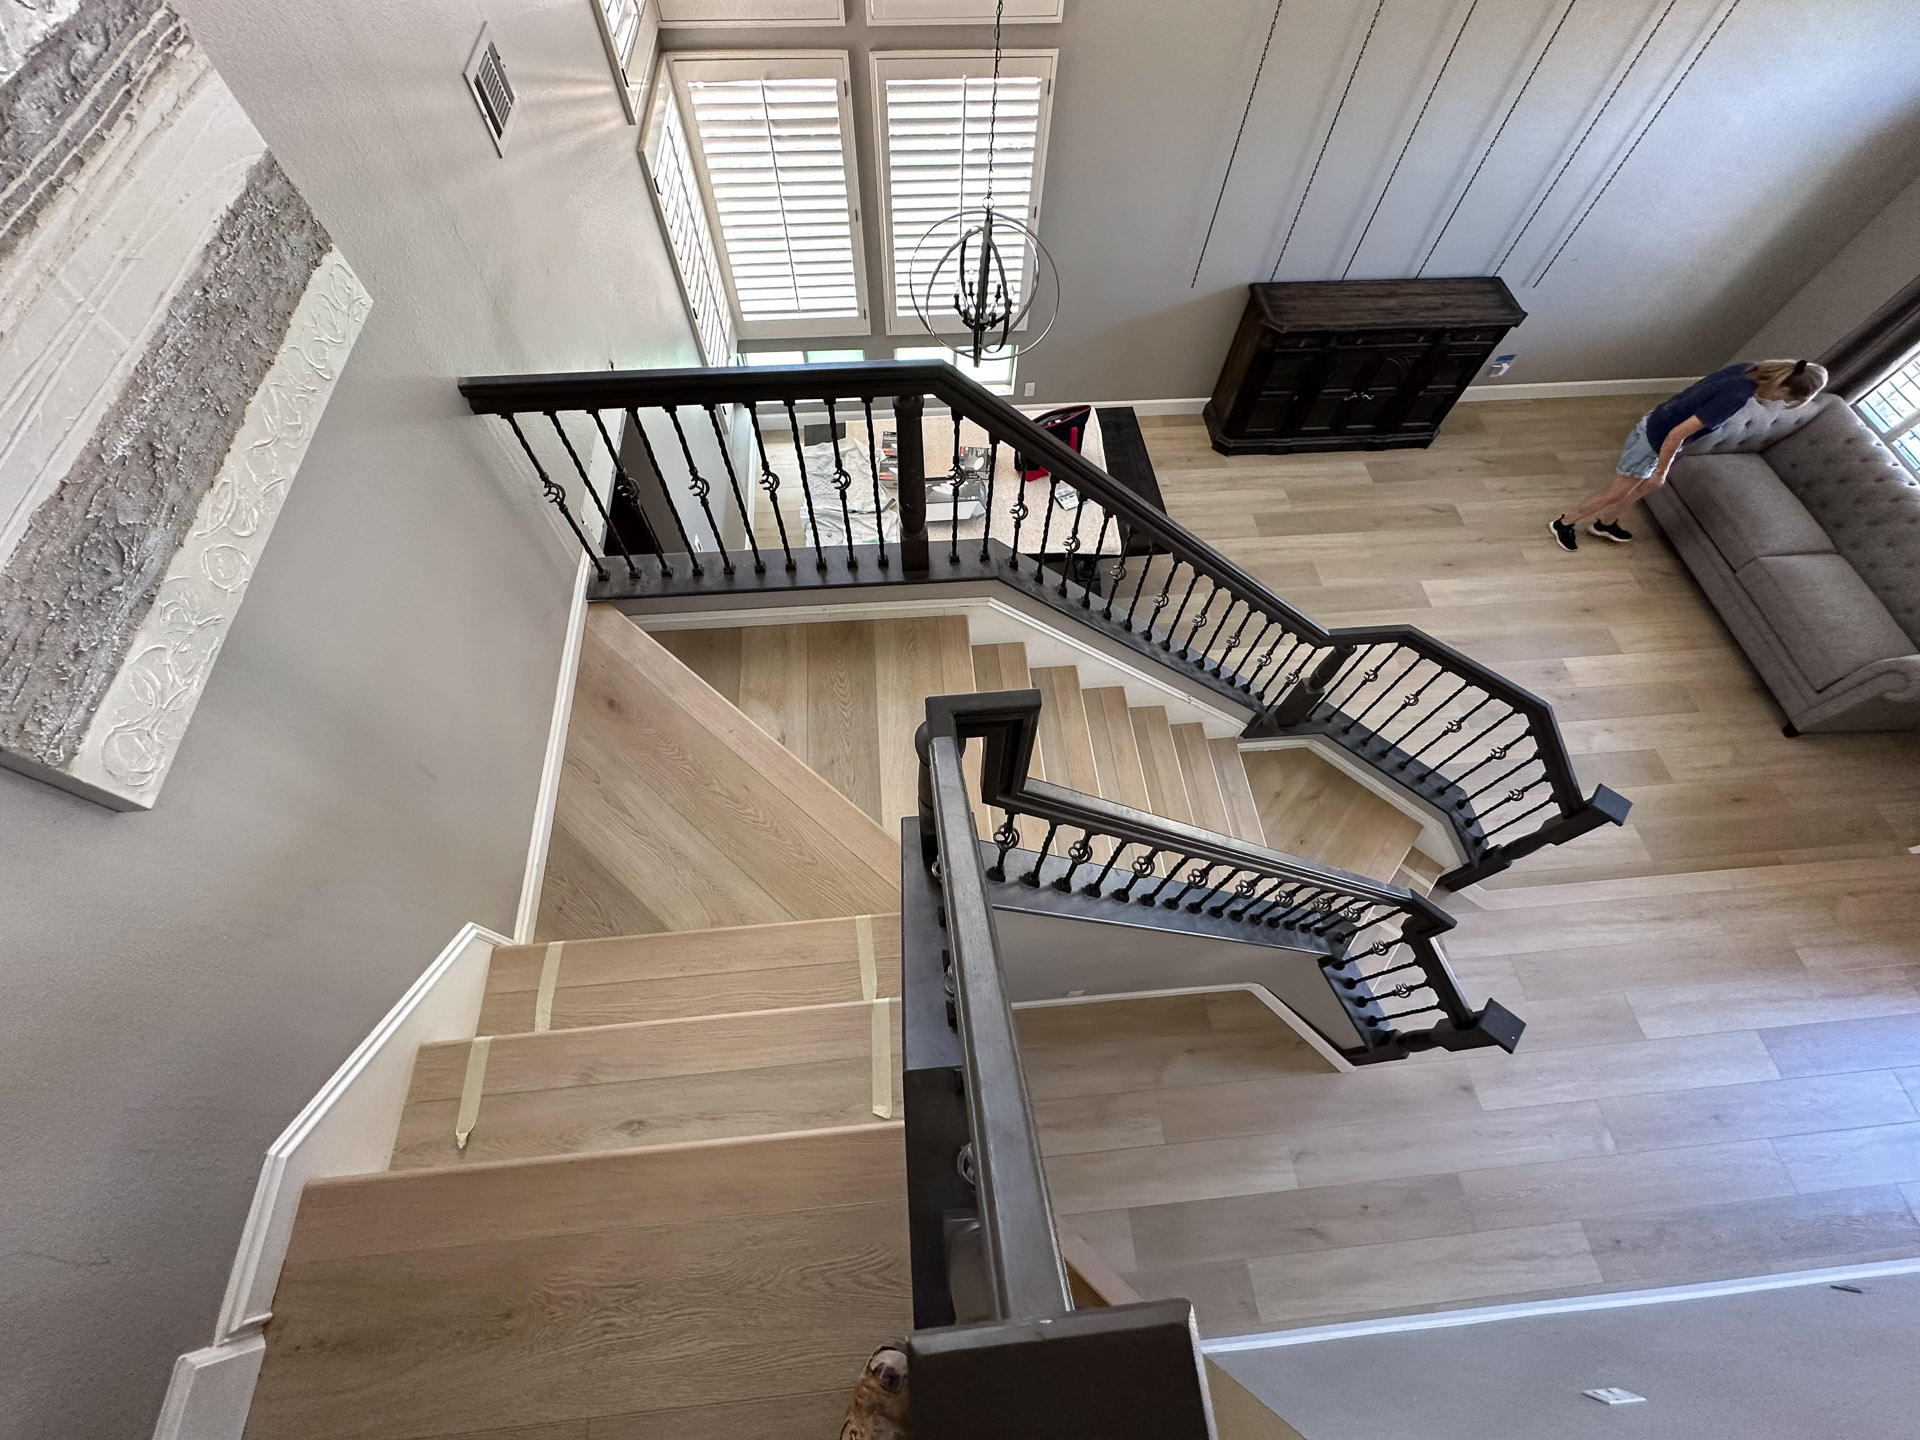 LVP installed on stairs